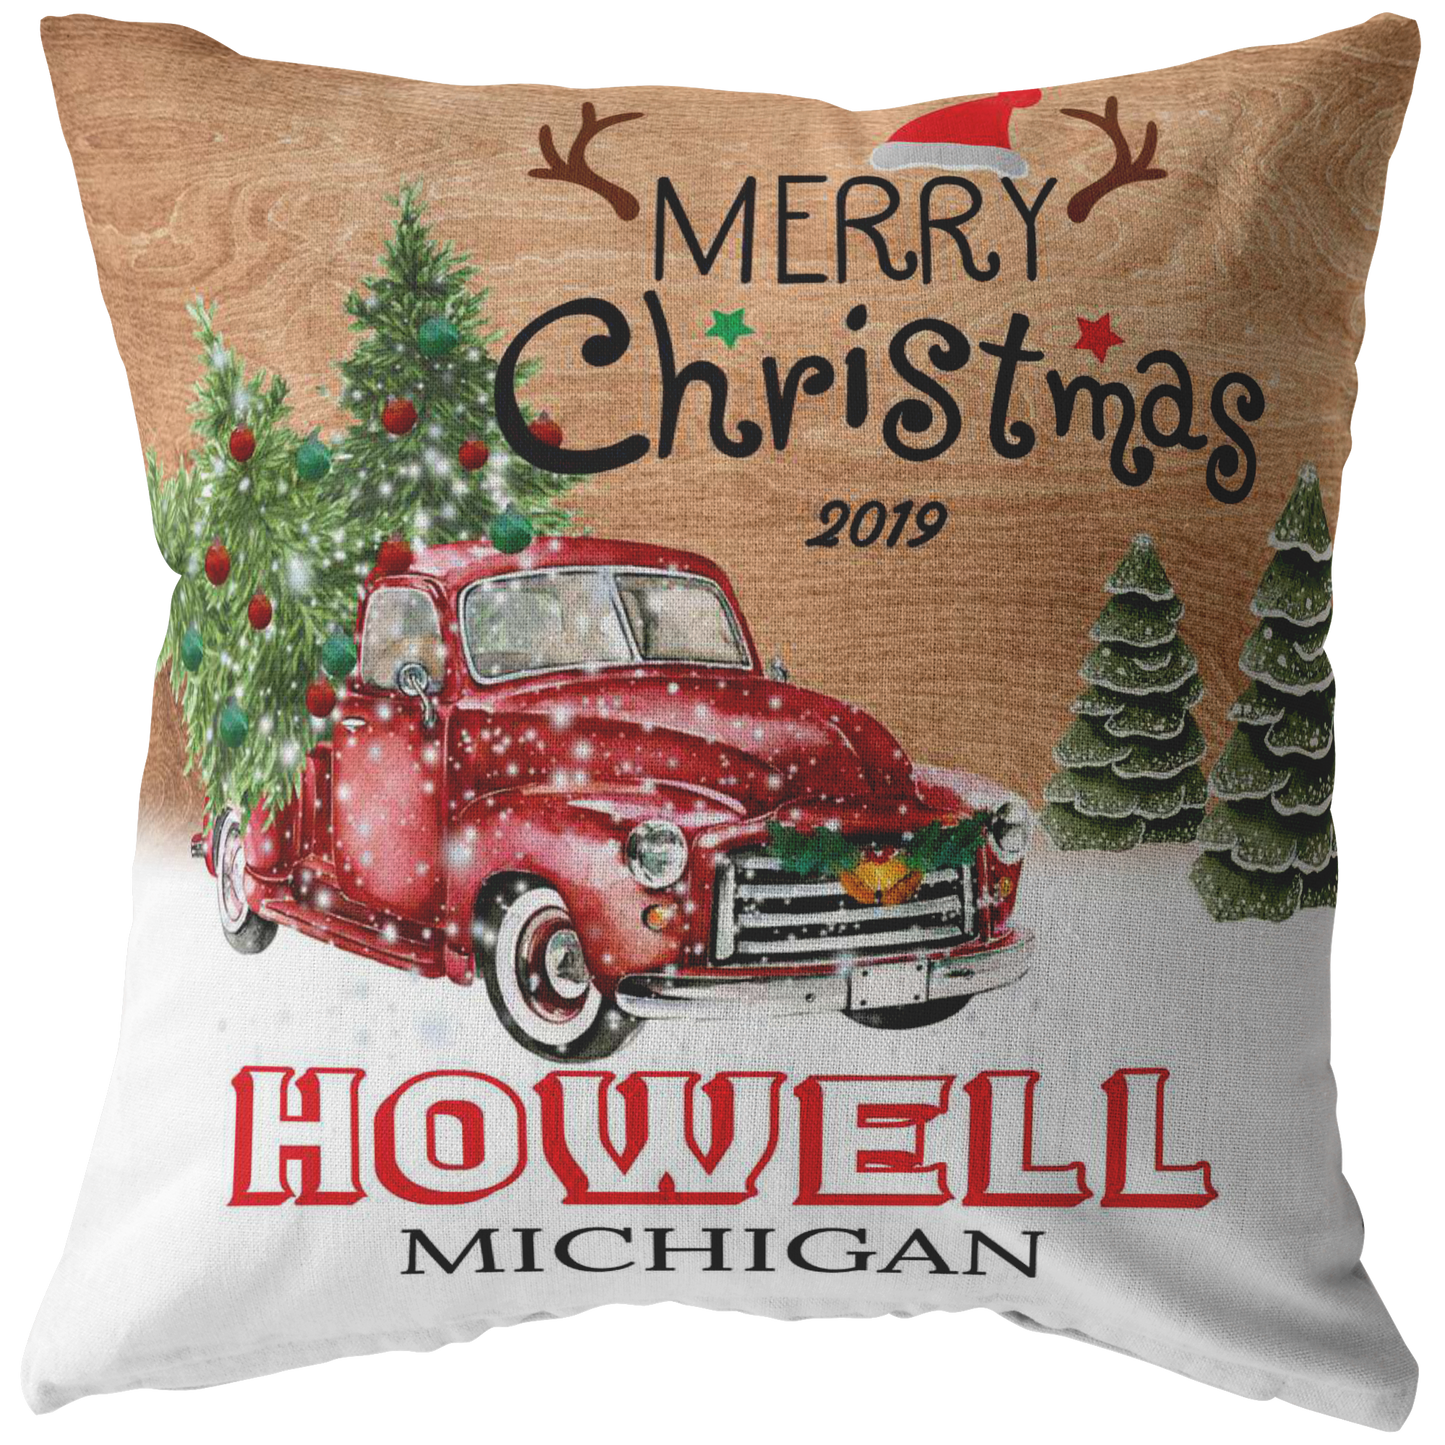 PL-21237896-sp-21804 - Merry Christmas Howell Michigan MI State 2019 - Home Decorat